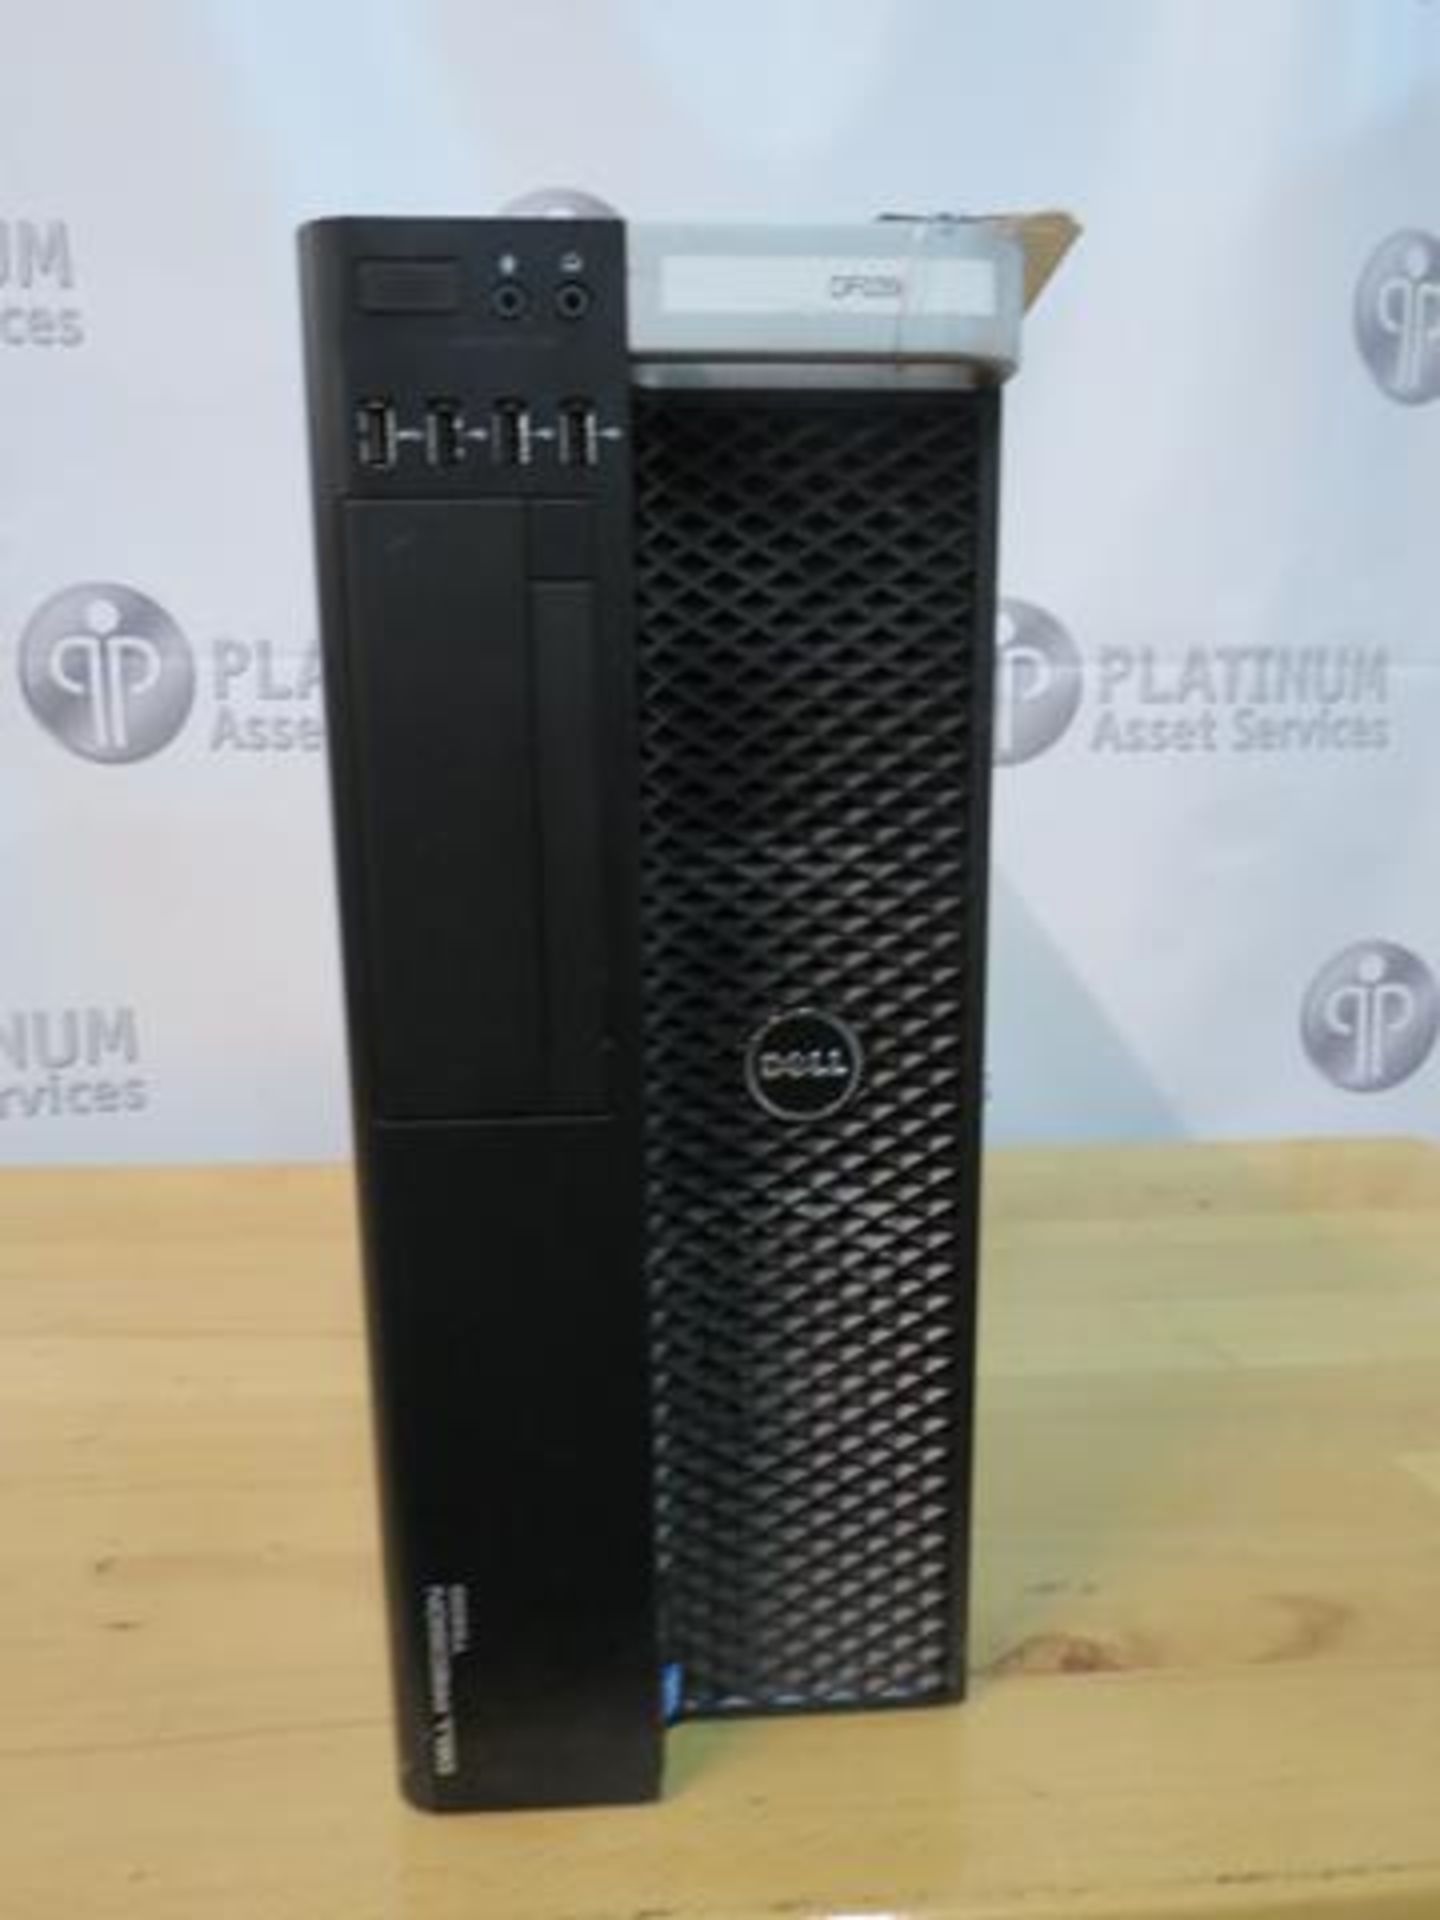 DELL, PRECISION T5600, DESKTOP WORKSTATION (UNIT DOES NOT BOOT UP) (TAG#116)